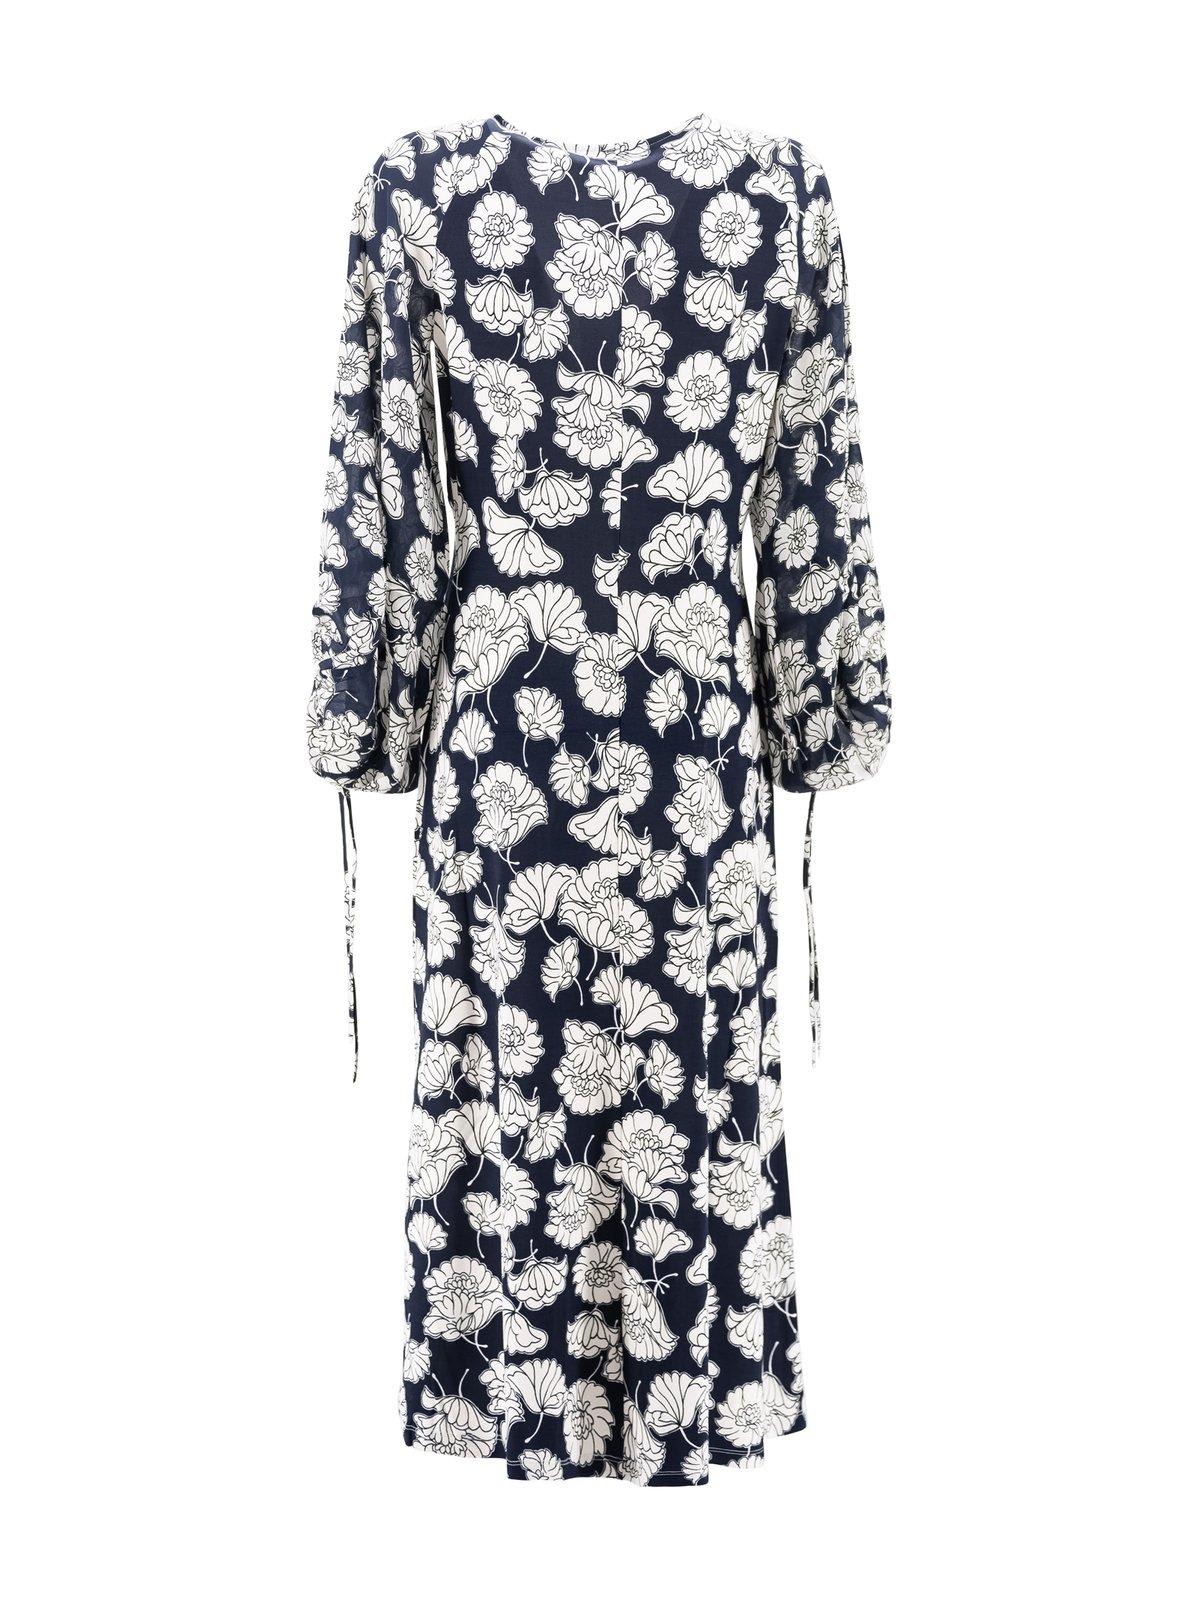 All-over Printed Long-sleeved Dress